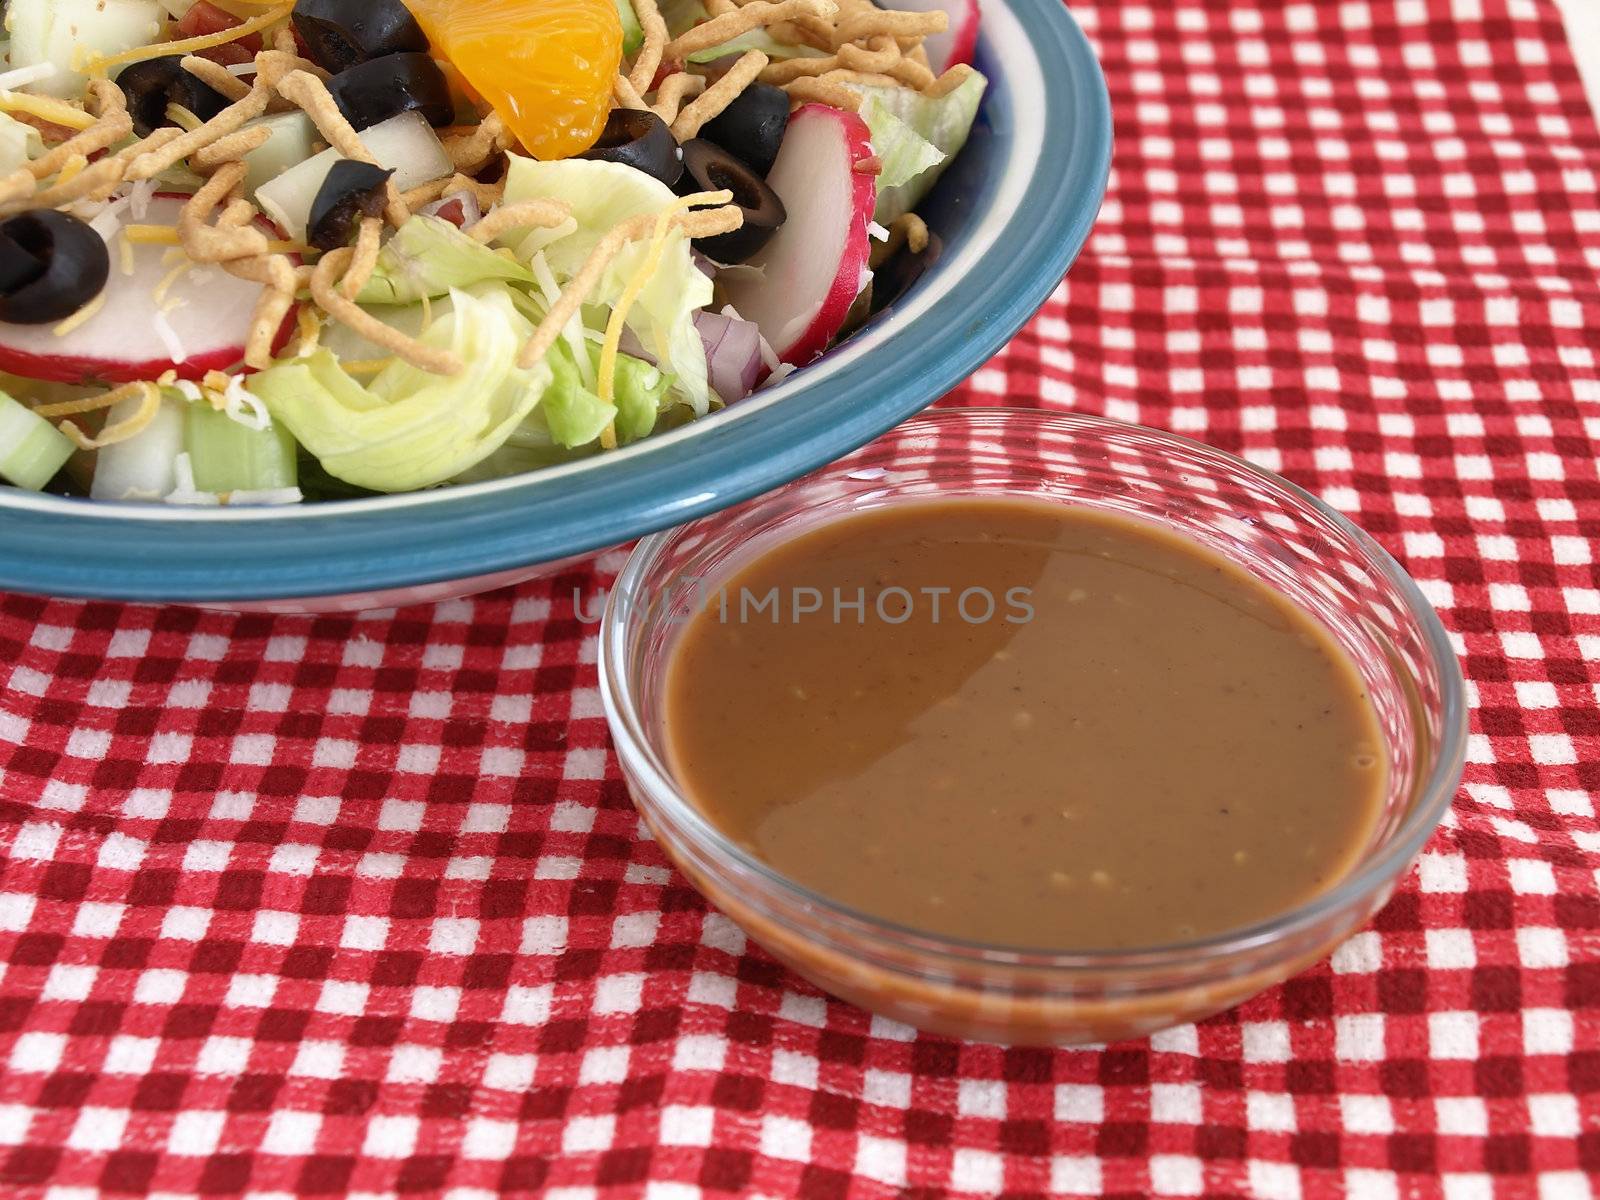 Salad and Dressing on Red Checks by RGebbiePhoto